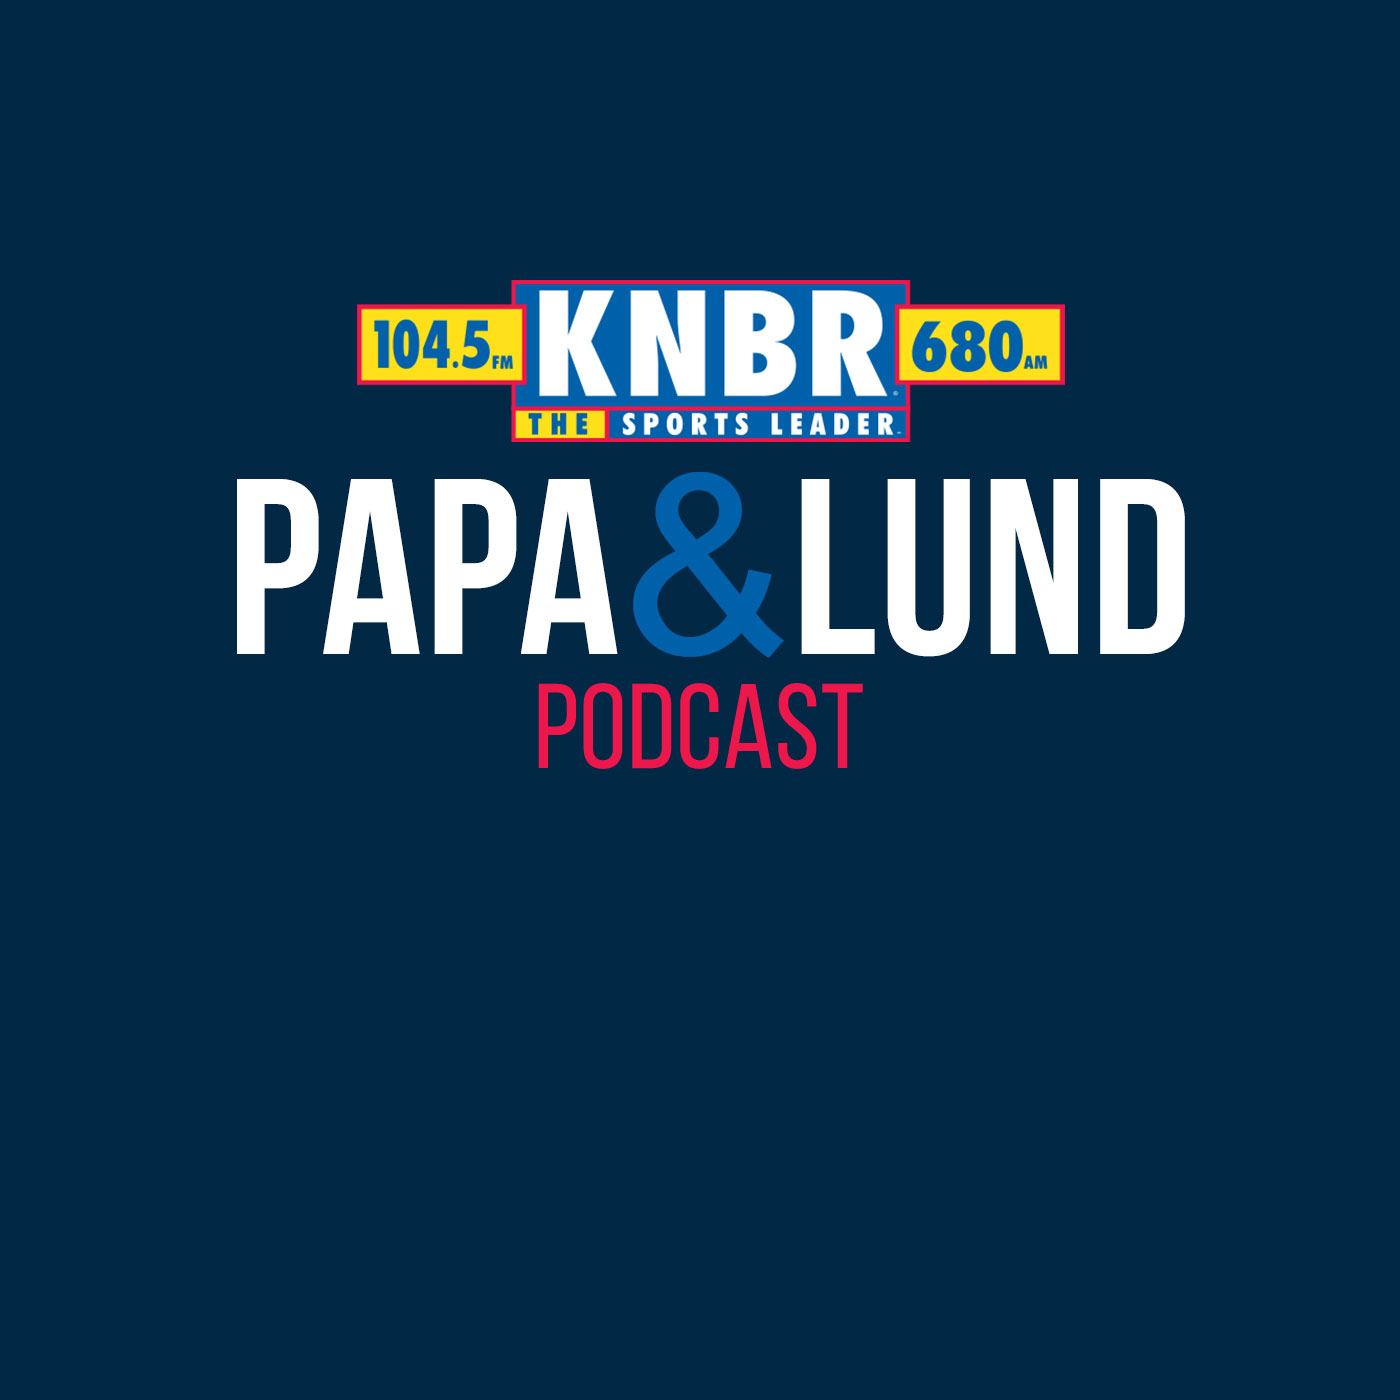 1-5 Papa & Lund preview this weeks Warriors/Mavs game with Mark Followill, TV Voice of the Mavs